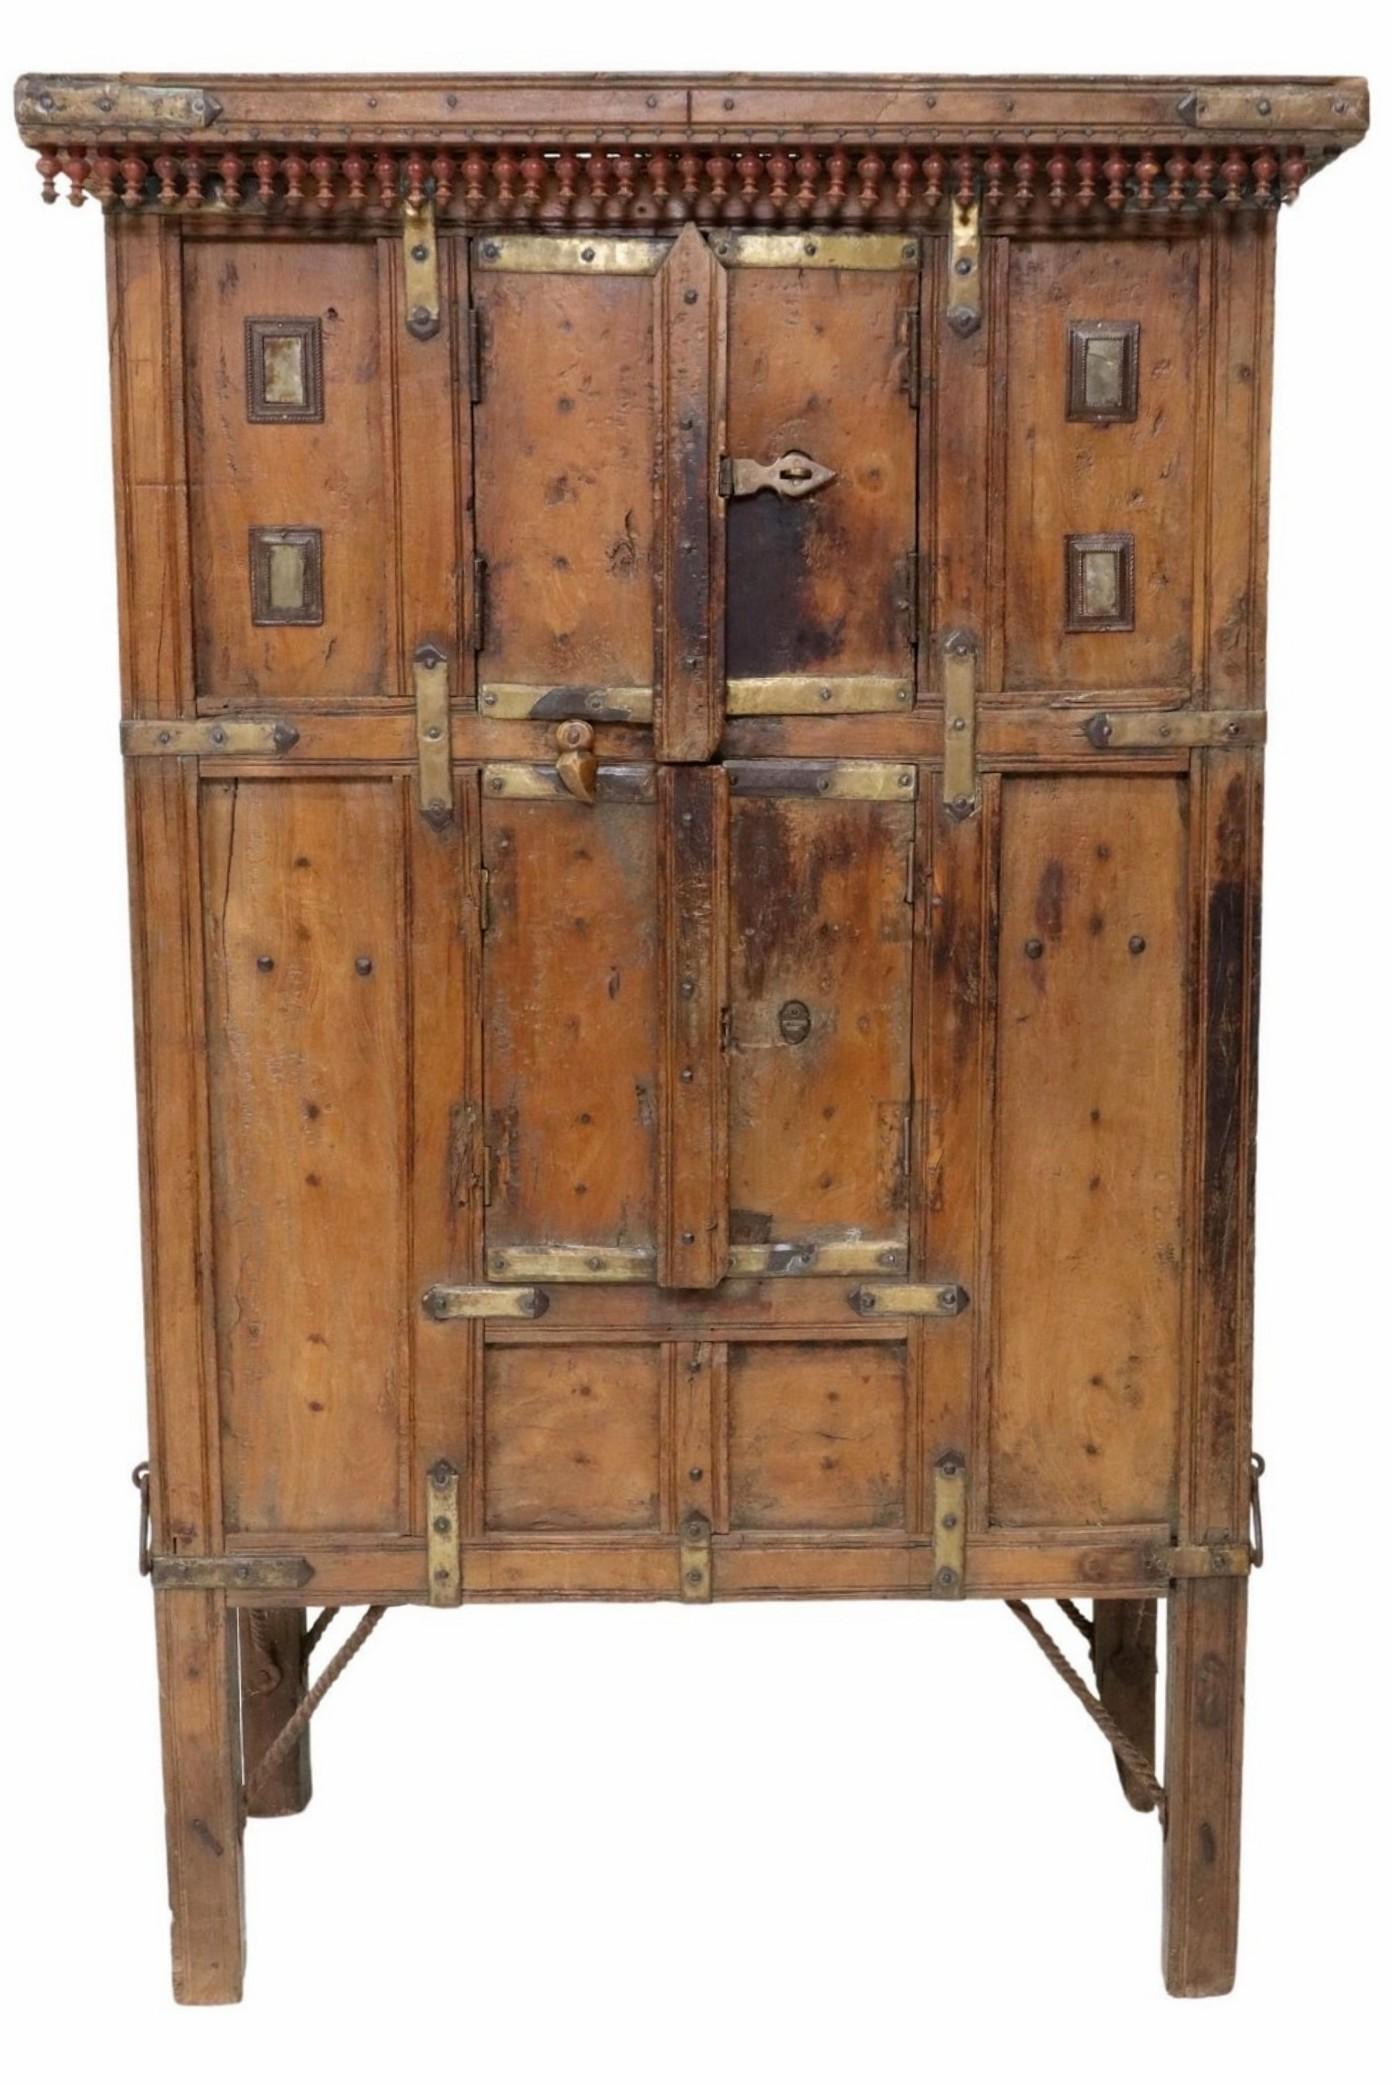 A rare and most impressive rustic Indian metal mounted spindled and carved wood cabinet. 

Hand-crafted in India in the 19th century, the one-of-a-kind folk art work features a rectangular cornice with drop spindle ornamentation, paneled heavy-duty